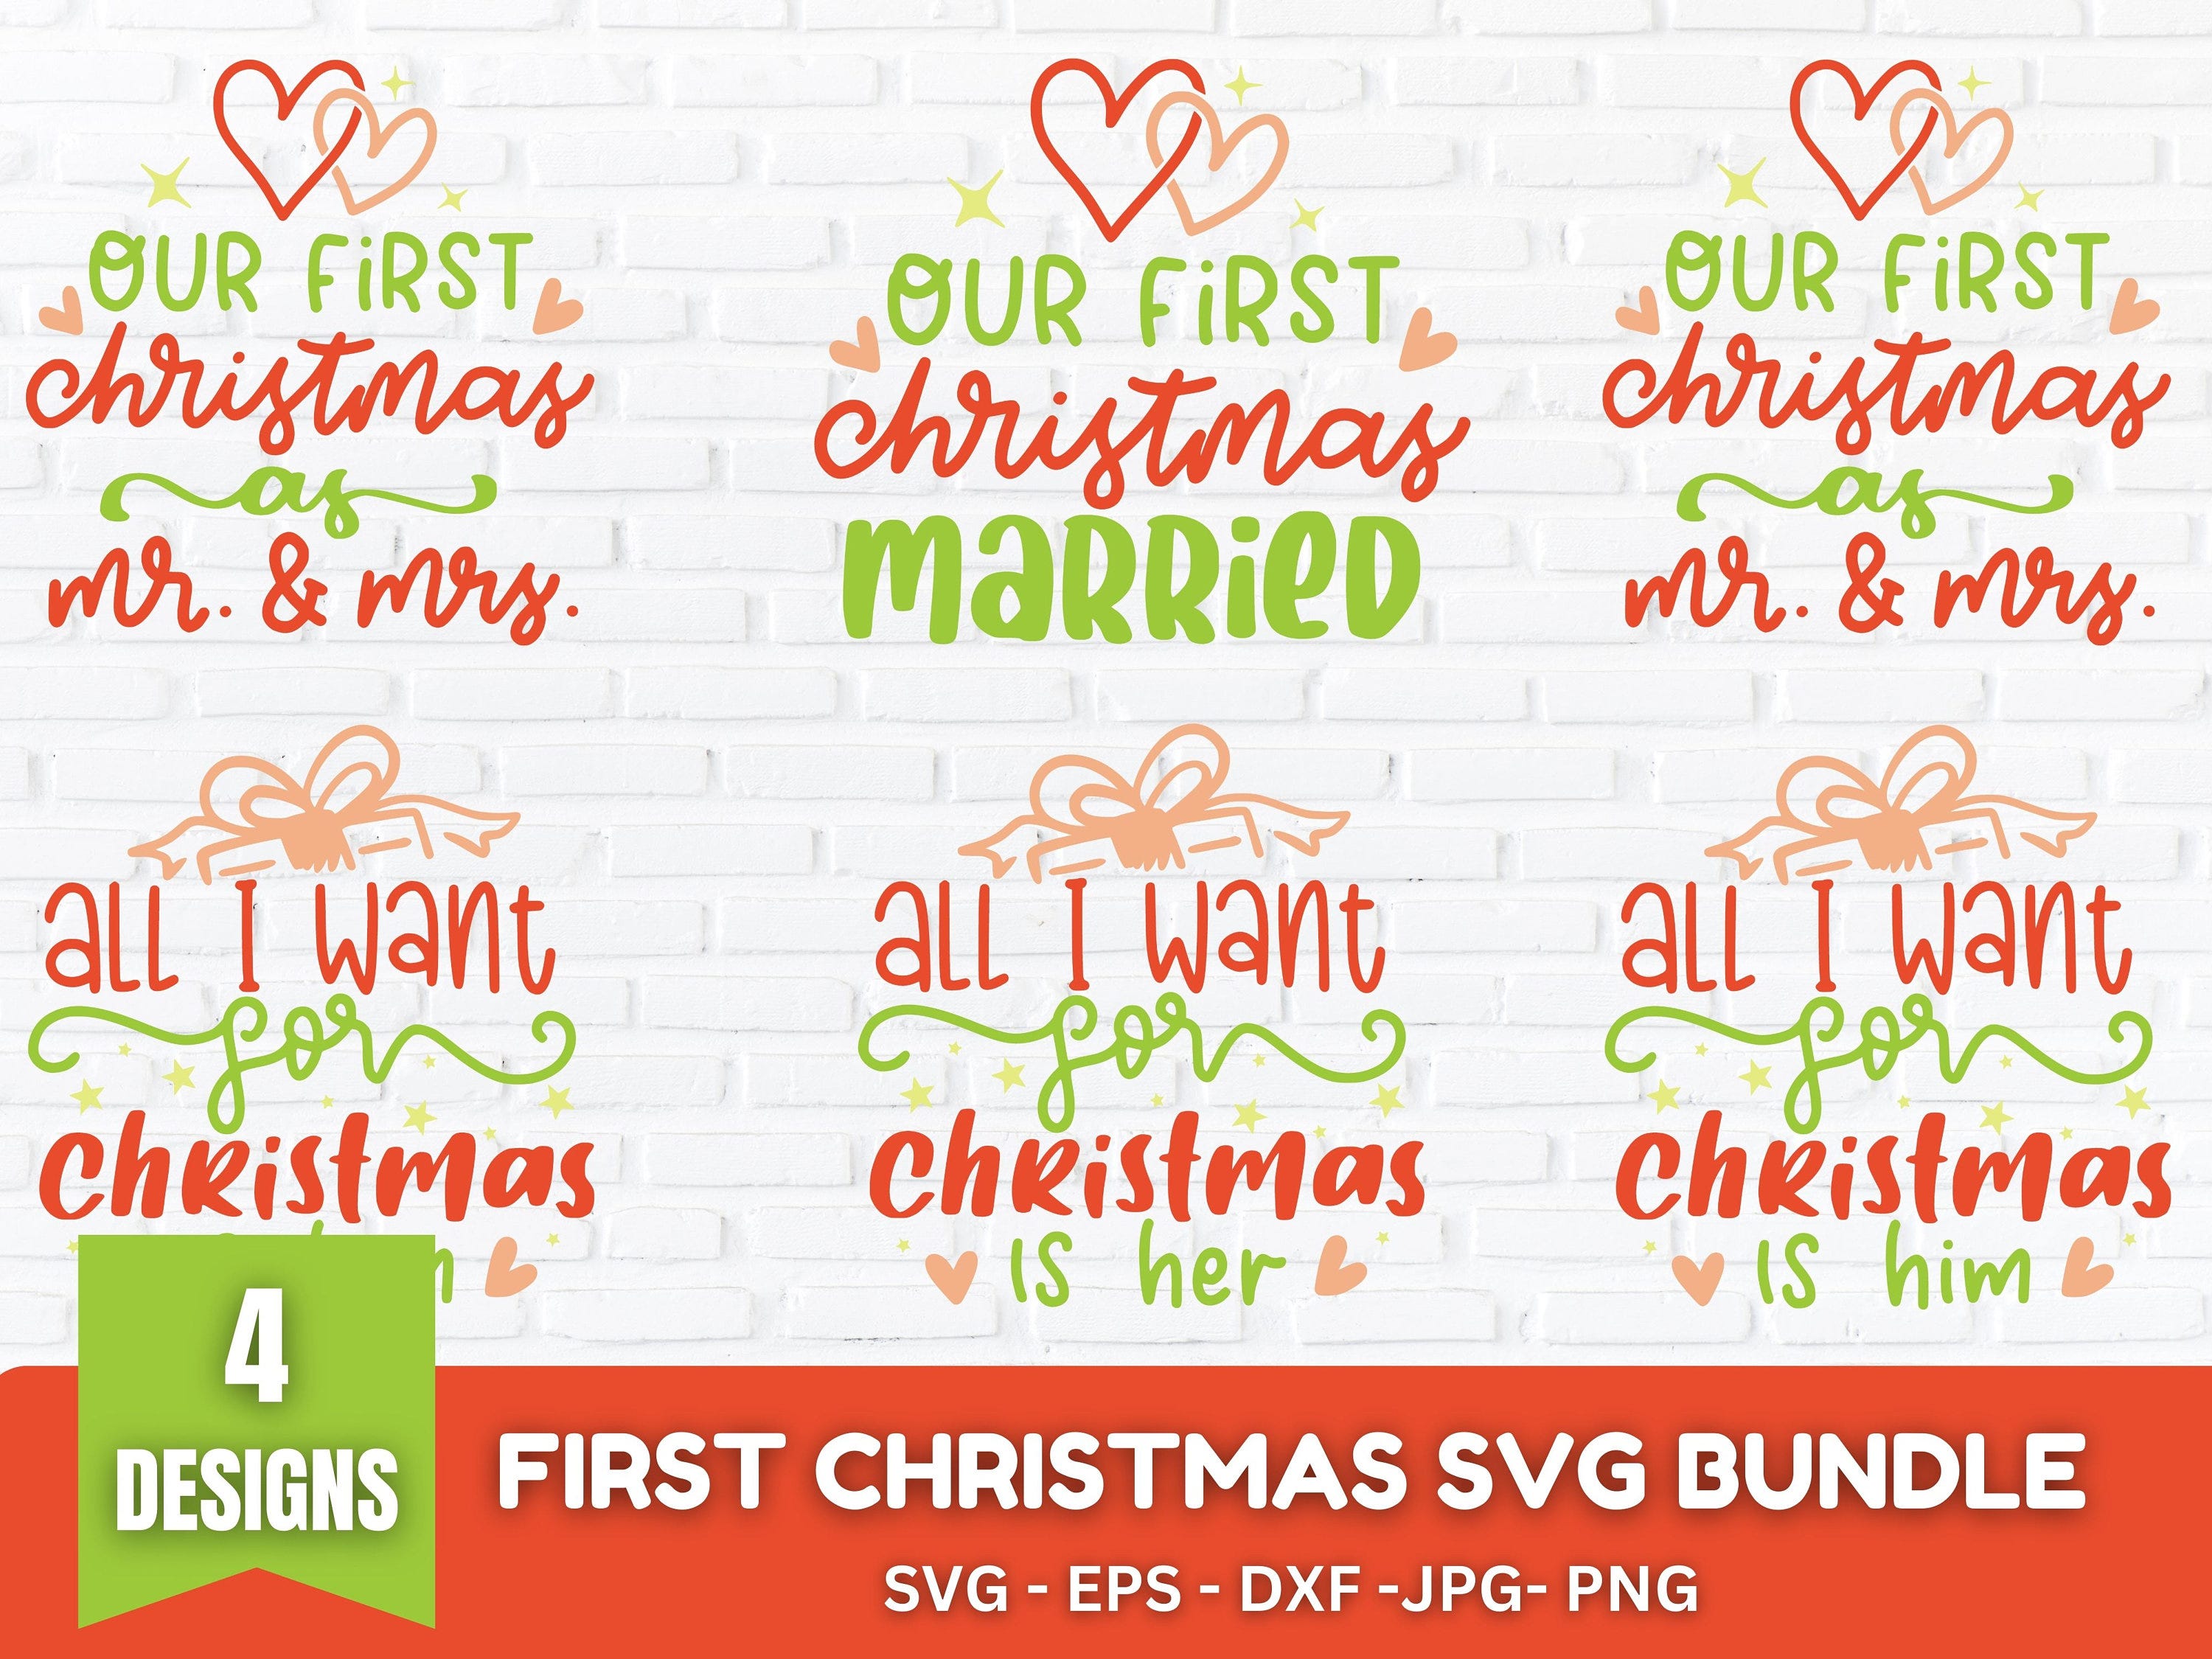 Our first Christmas svg bundle, Our first Christmas together, Our first Christmas together in our new home, Christmas Ornament svg